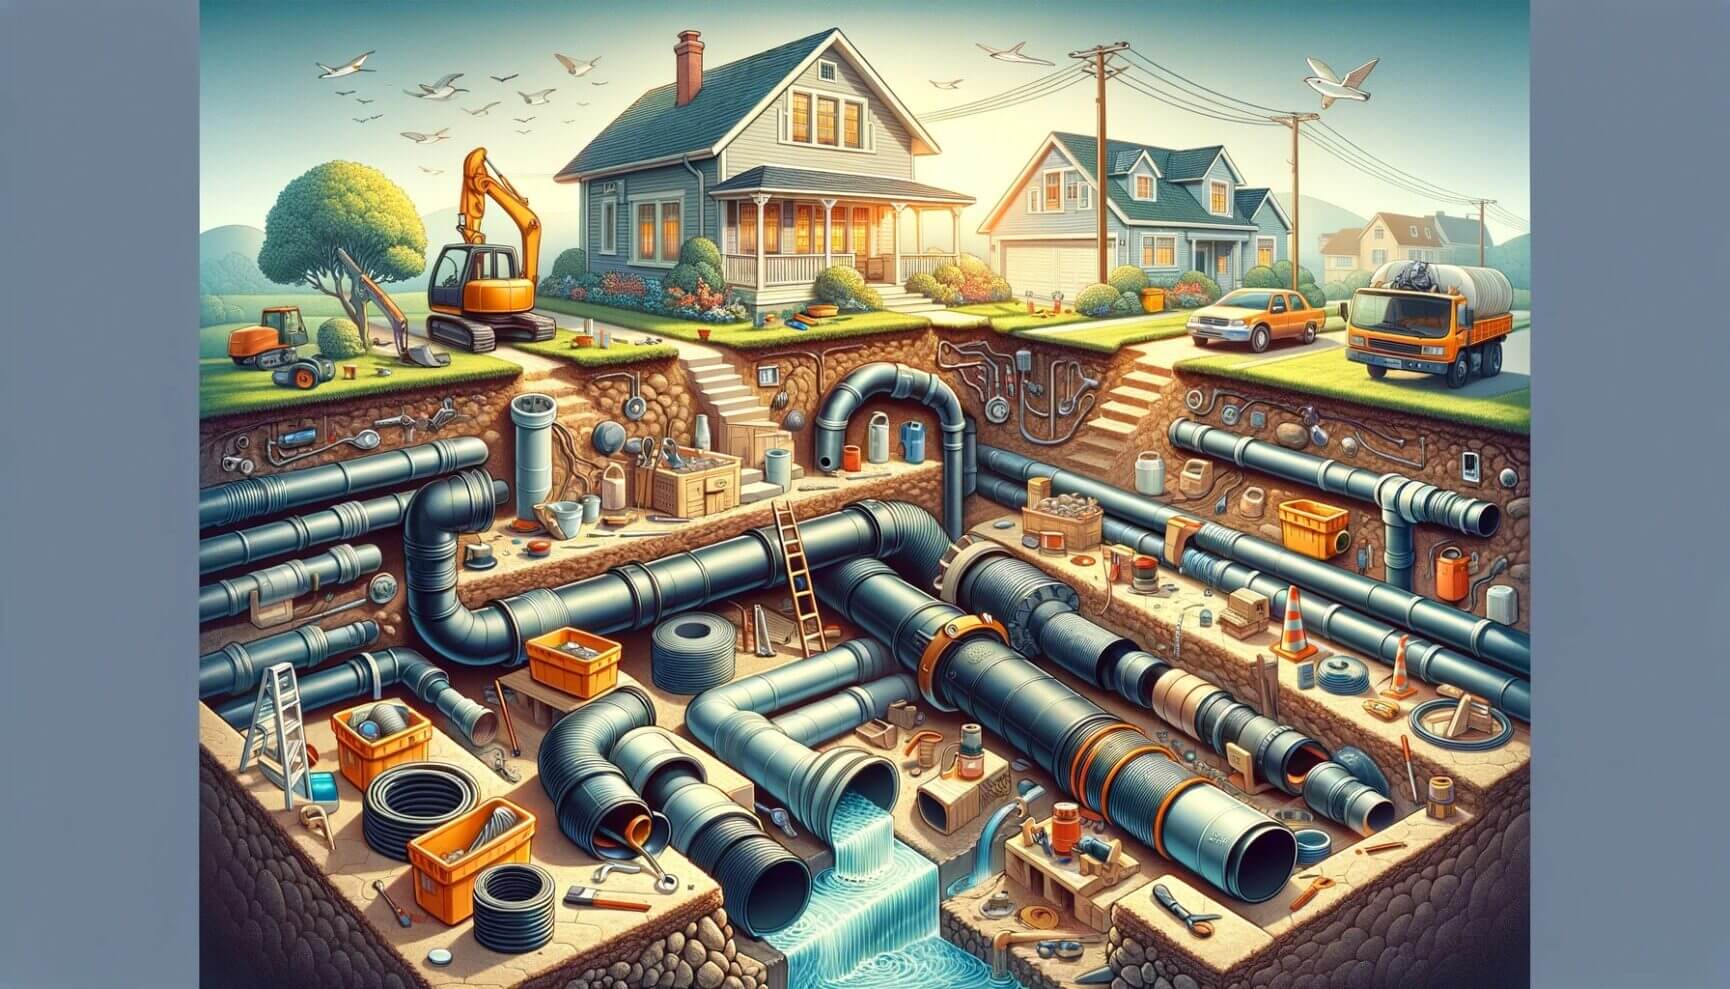 A drawing of a house with pipes in it.